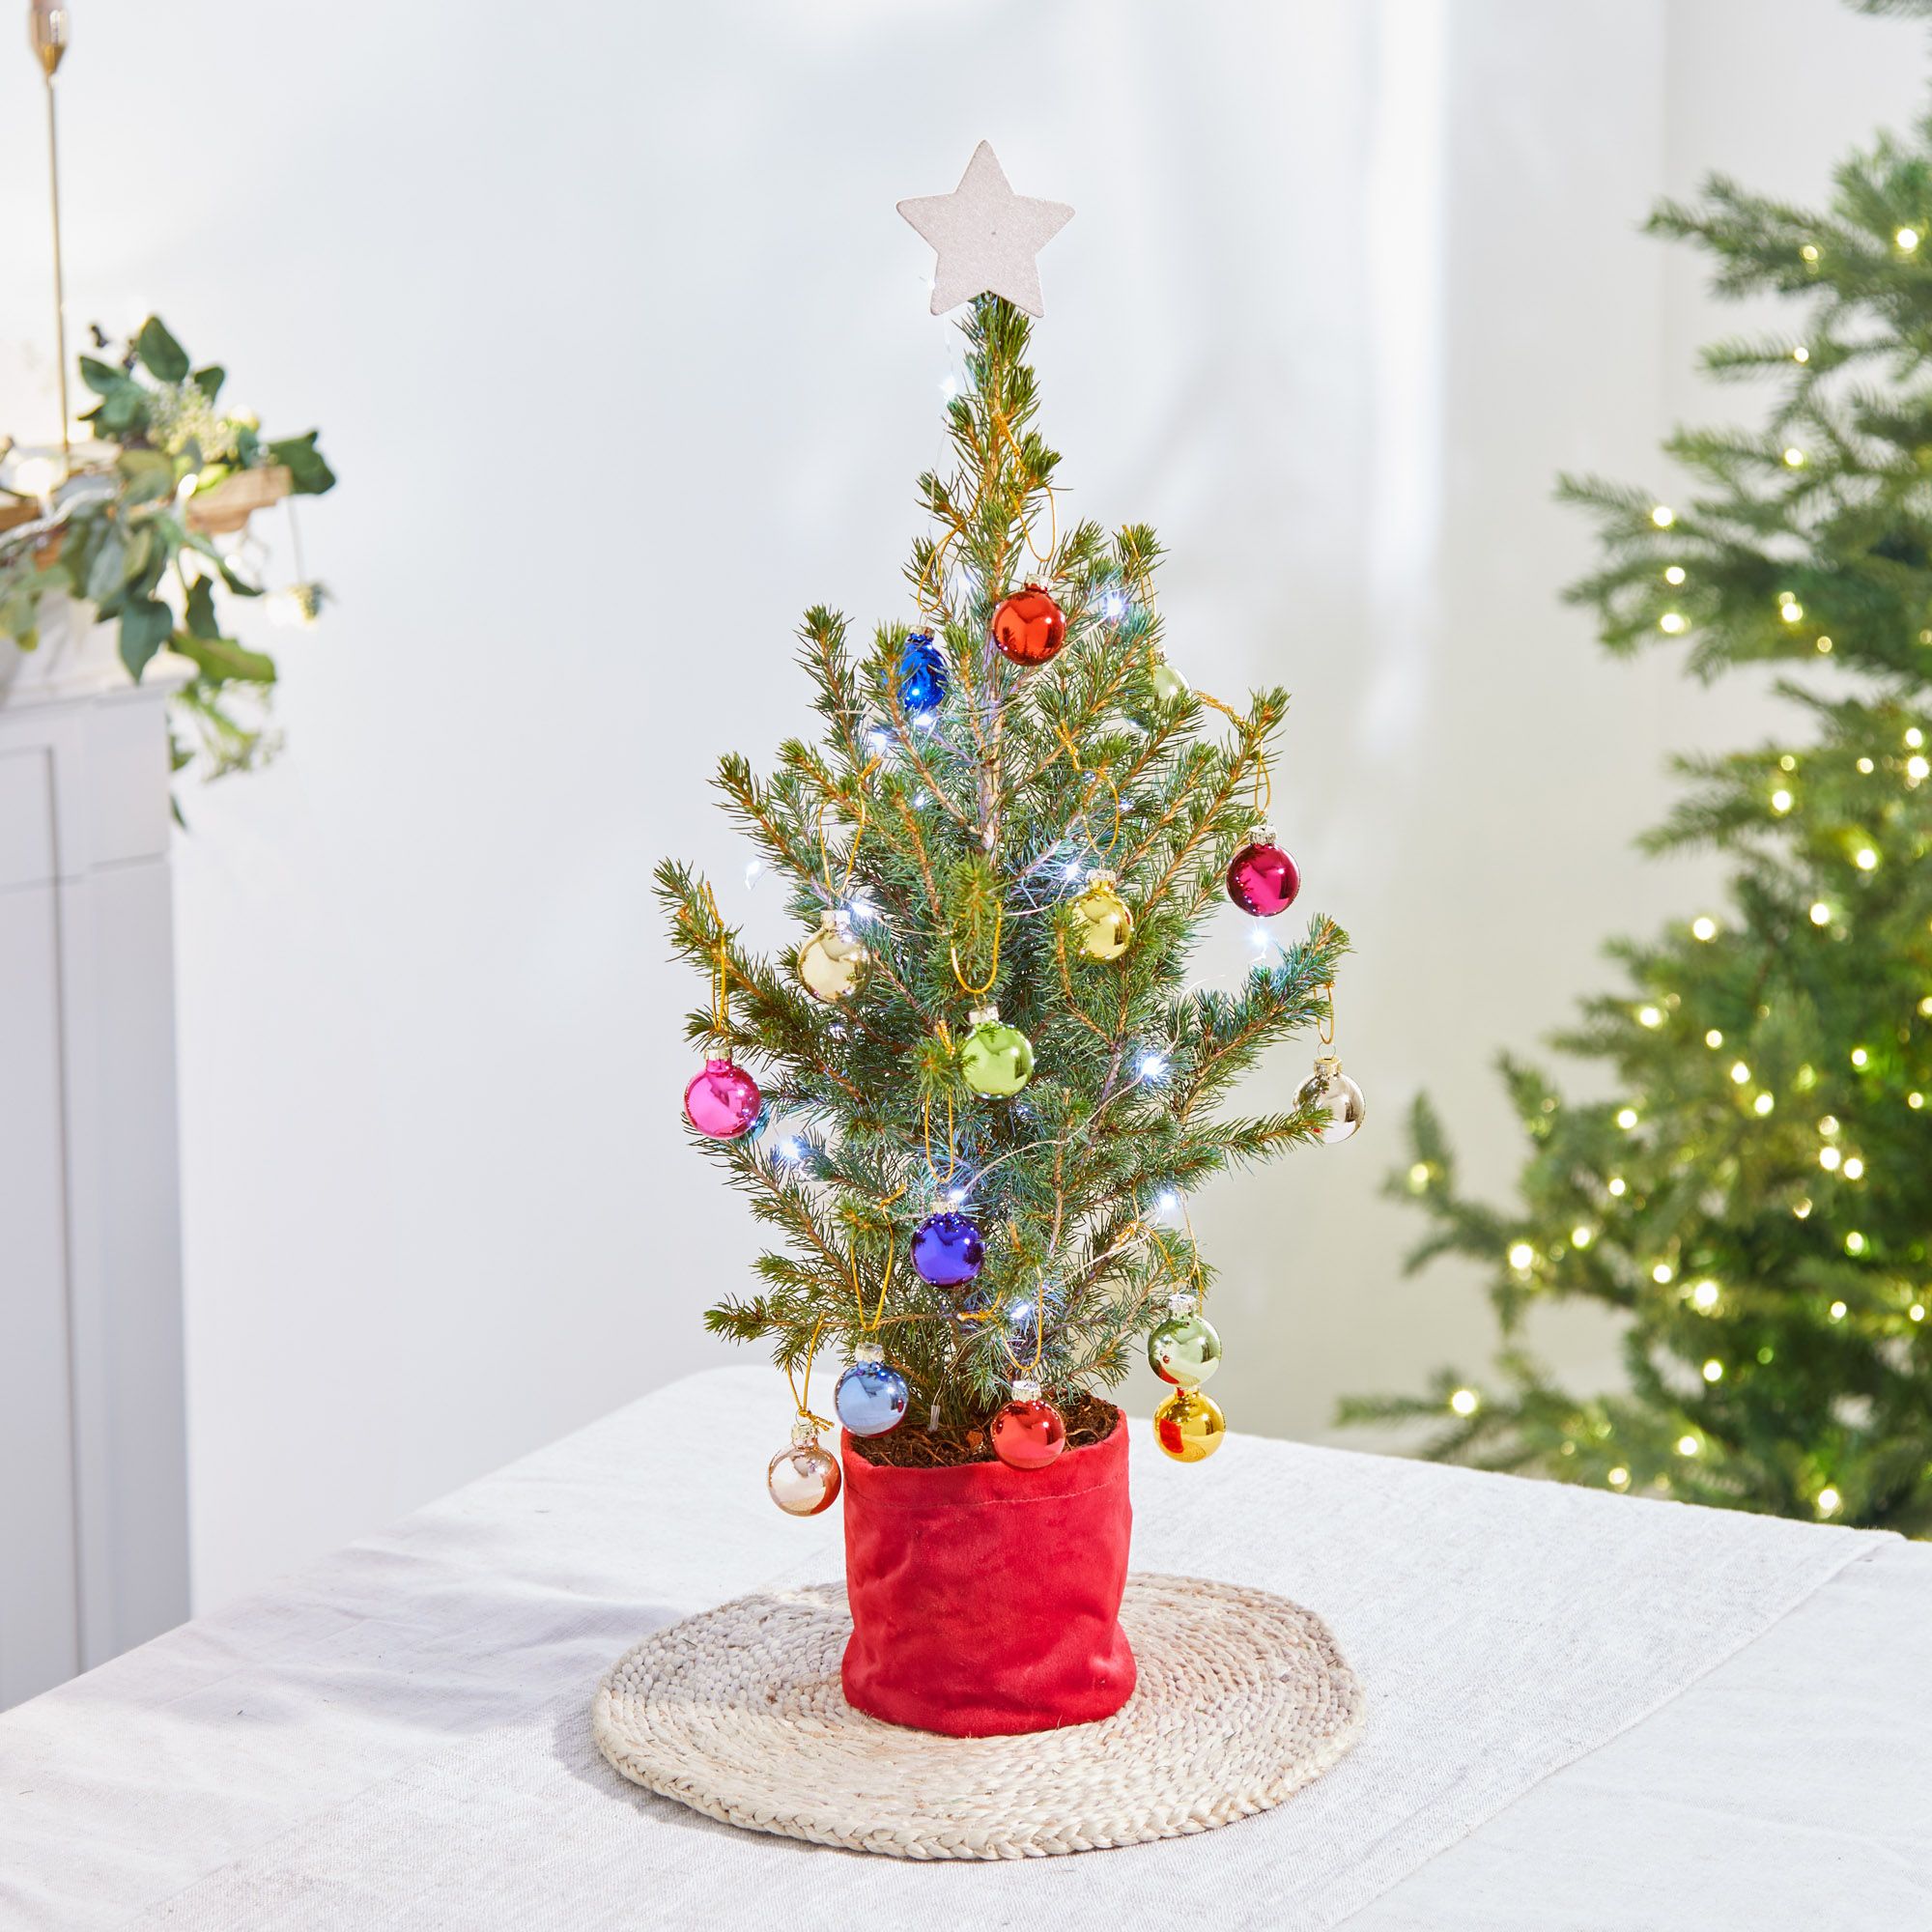 Send a Letterbox real Christmas tree | Arena Flowers